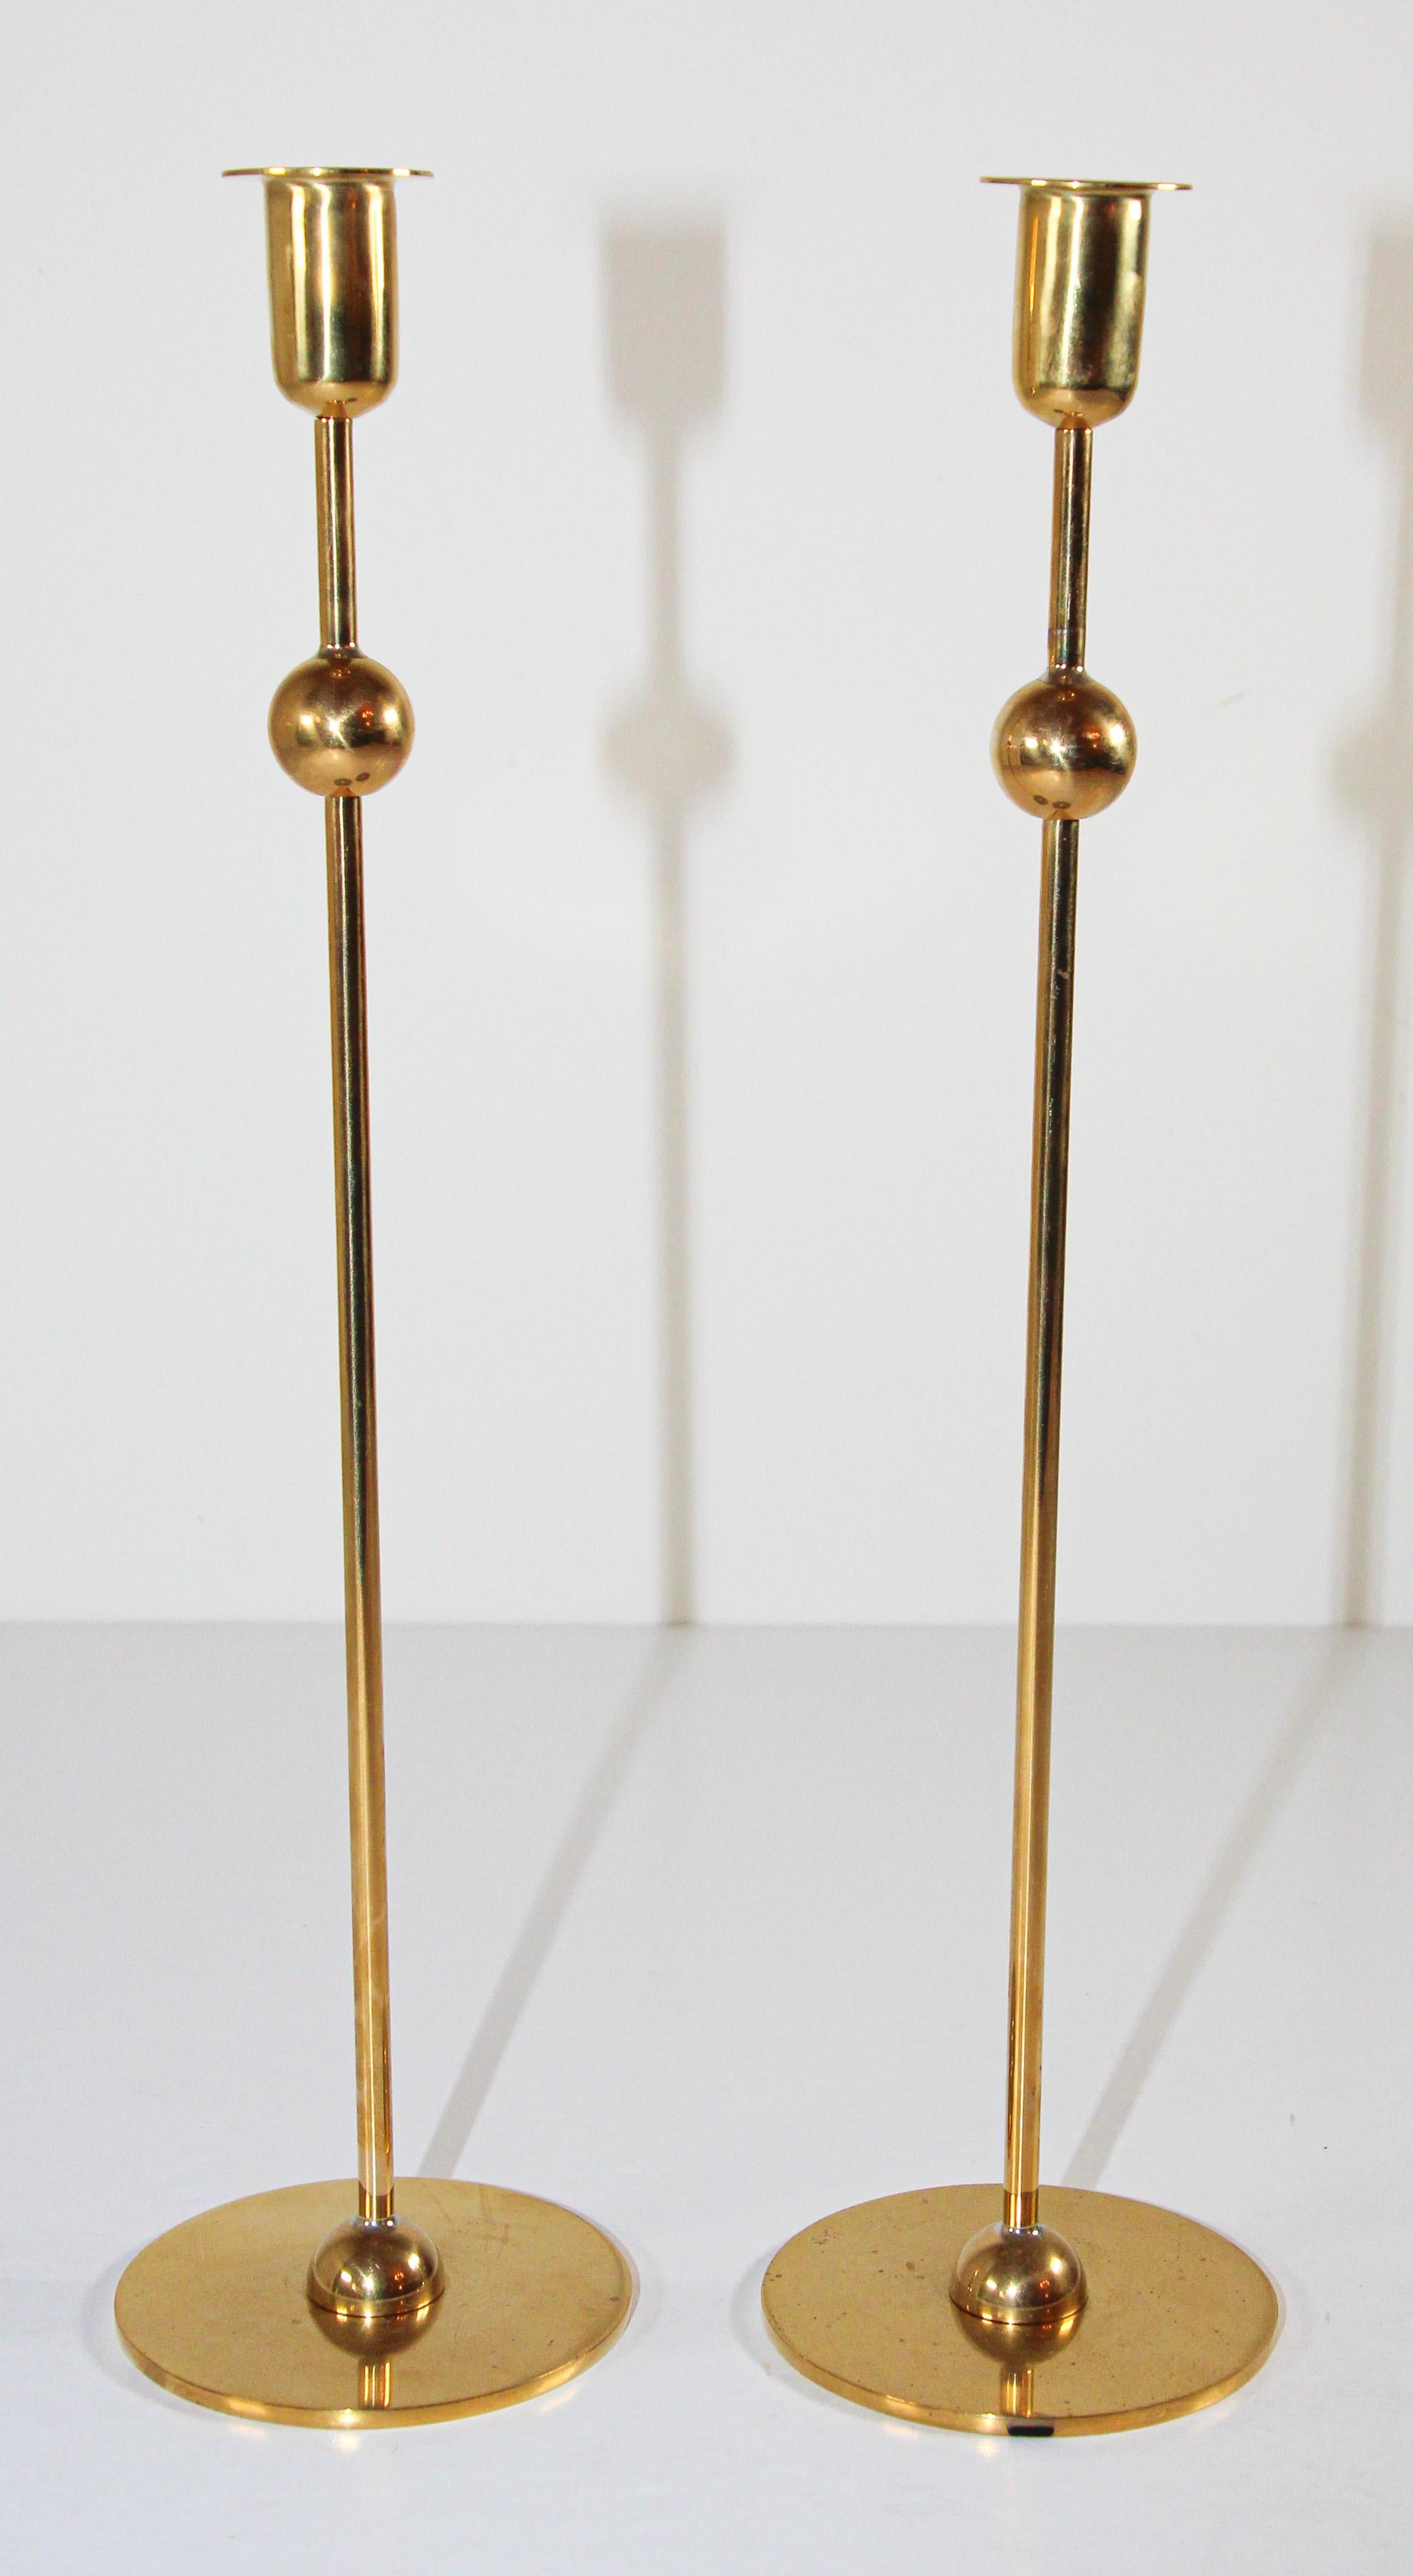 Polished brass candle holder globe by Estrid Ericson for Svenskt Tenn Sweden
The light at the dining table was a matter that lay close to Estrid Ericson’s heart. During a radio interview in 1951 she commented that candle holders should be high,